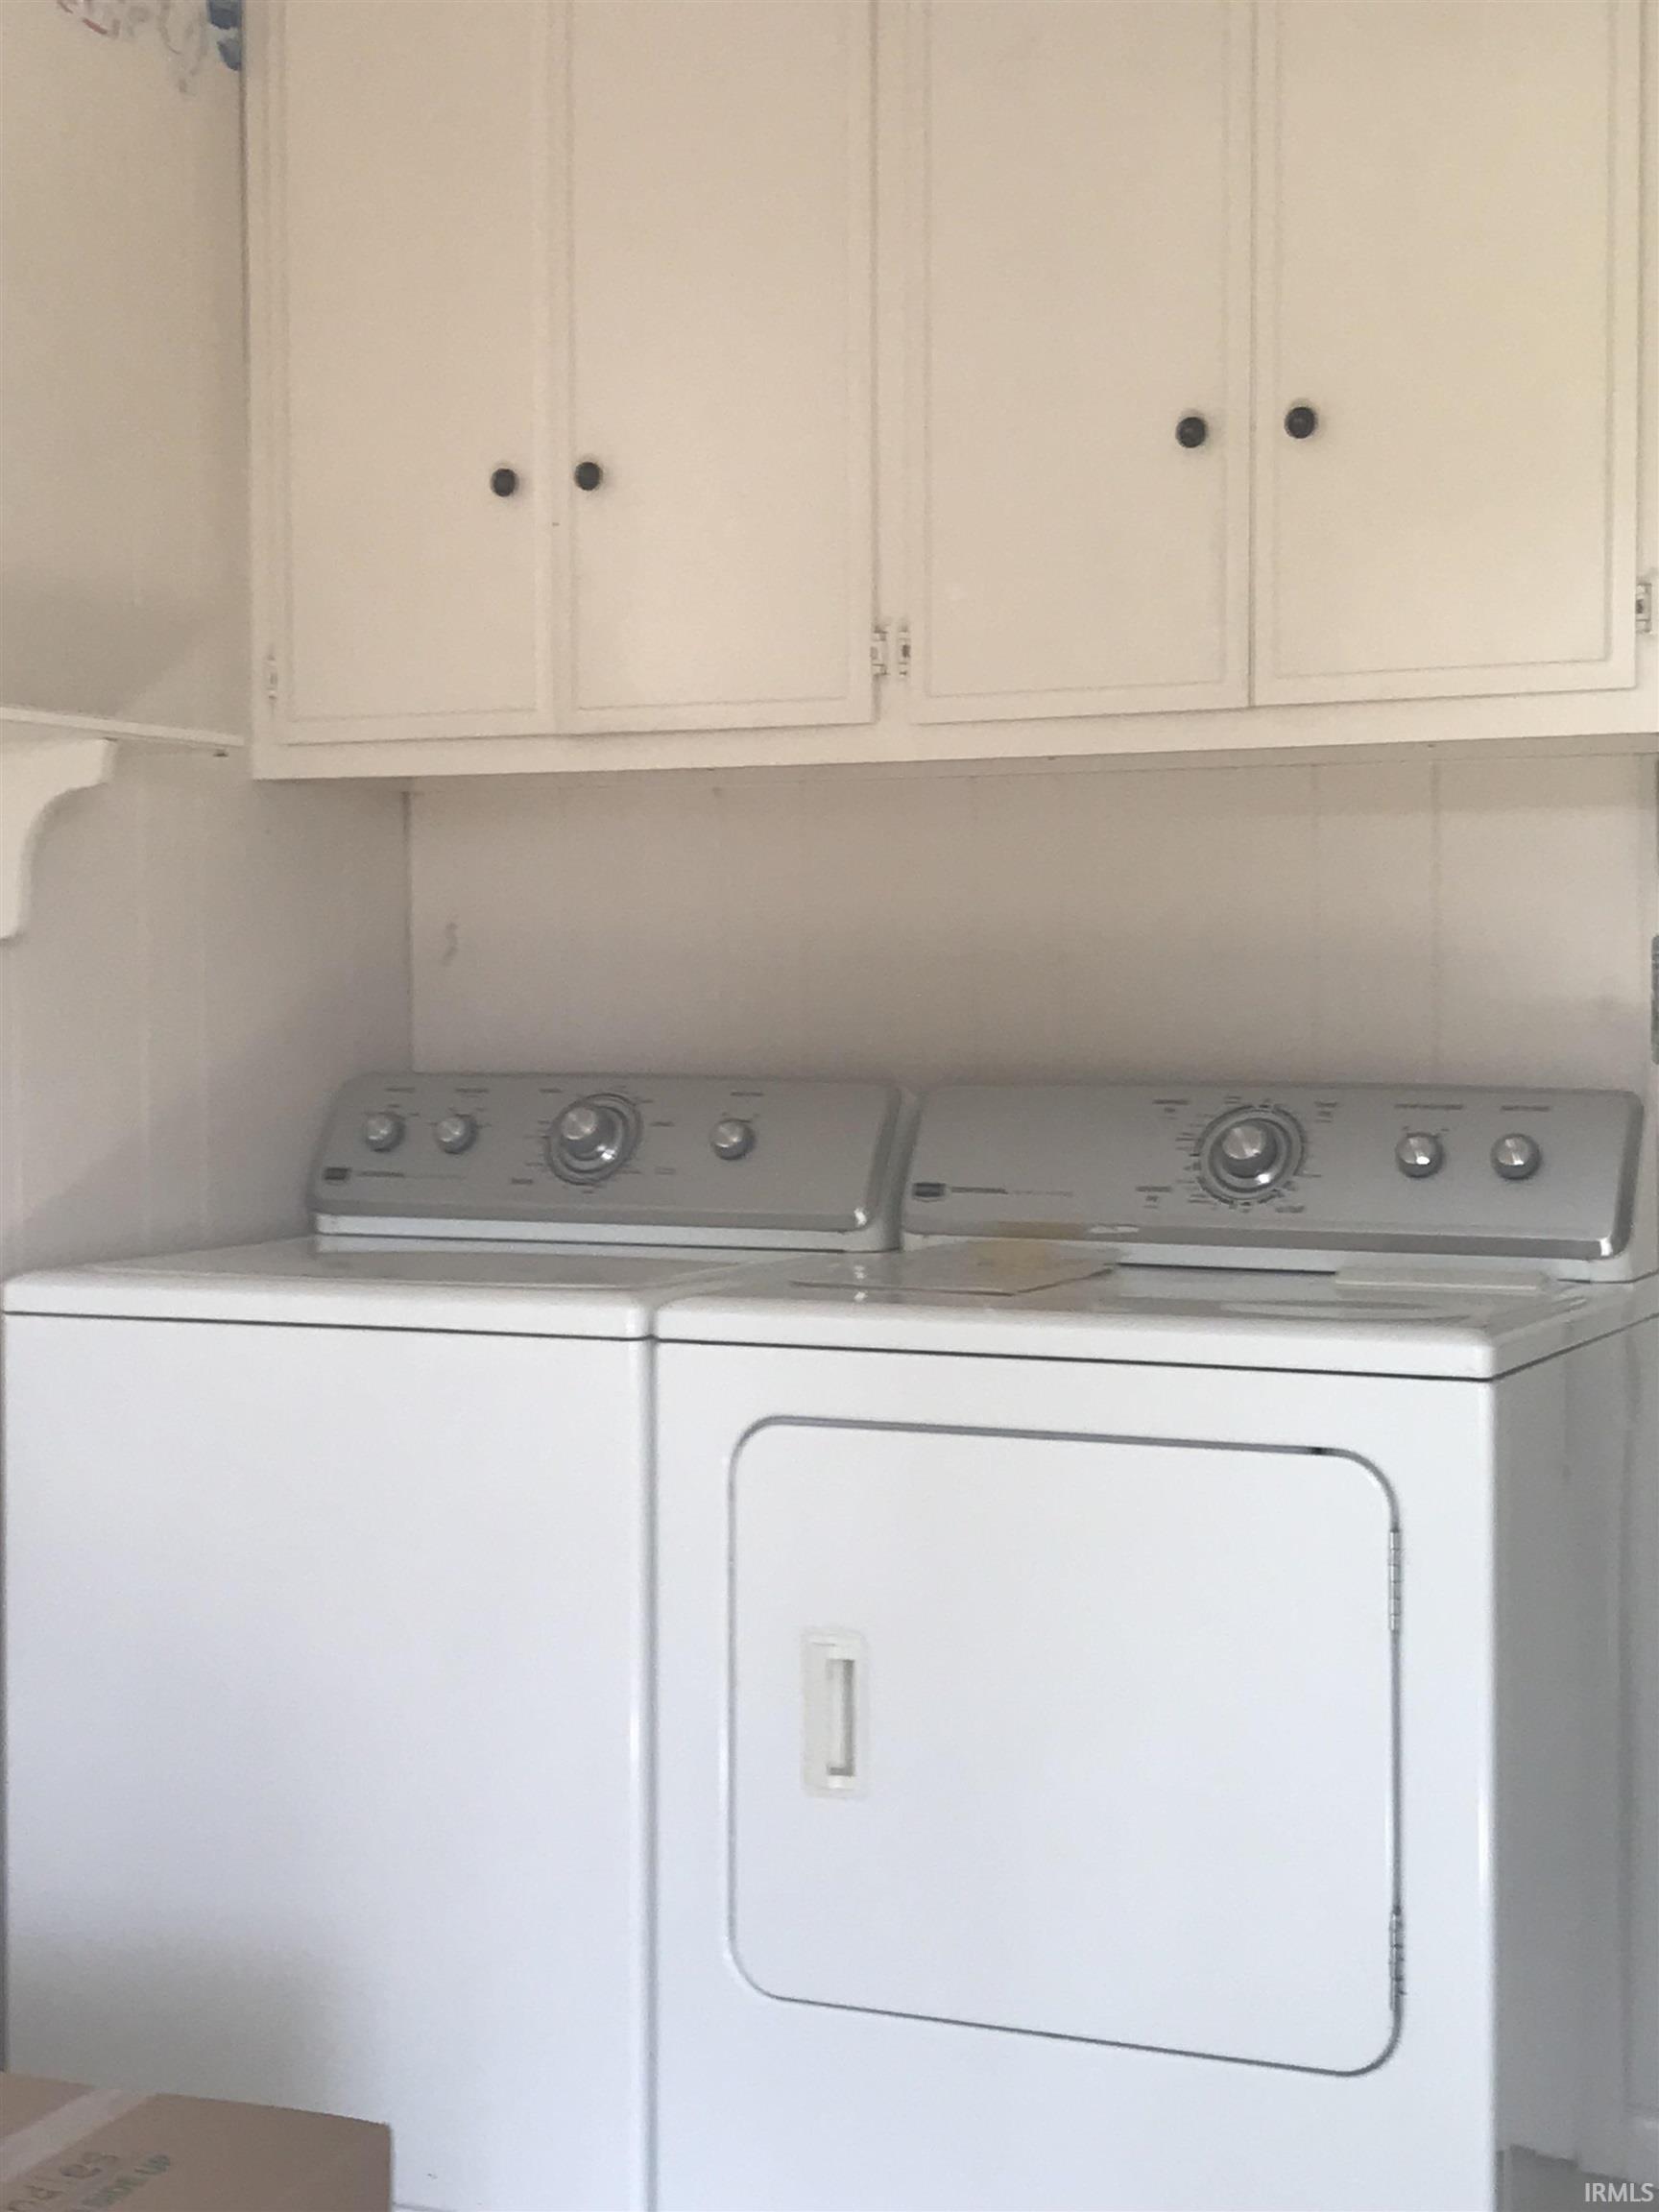 Washer, dryer, cabinets on wall, water softner